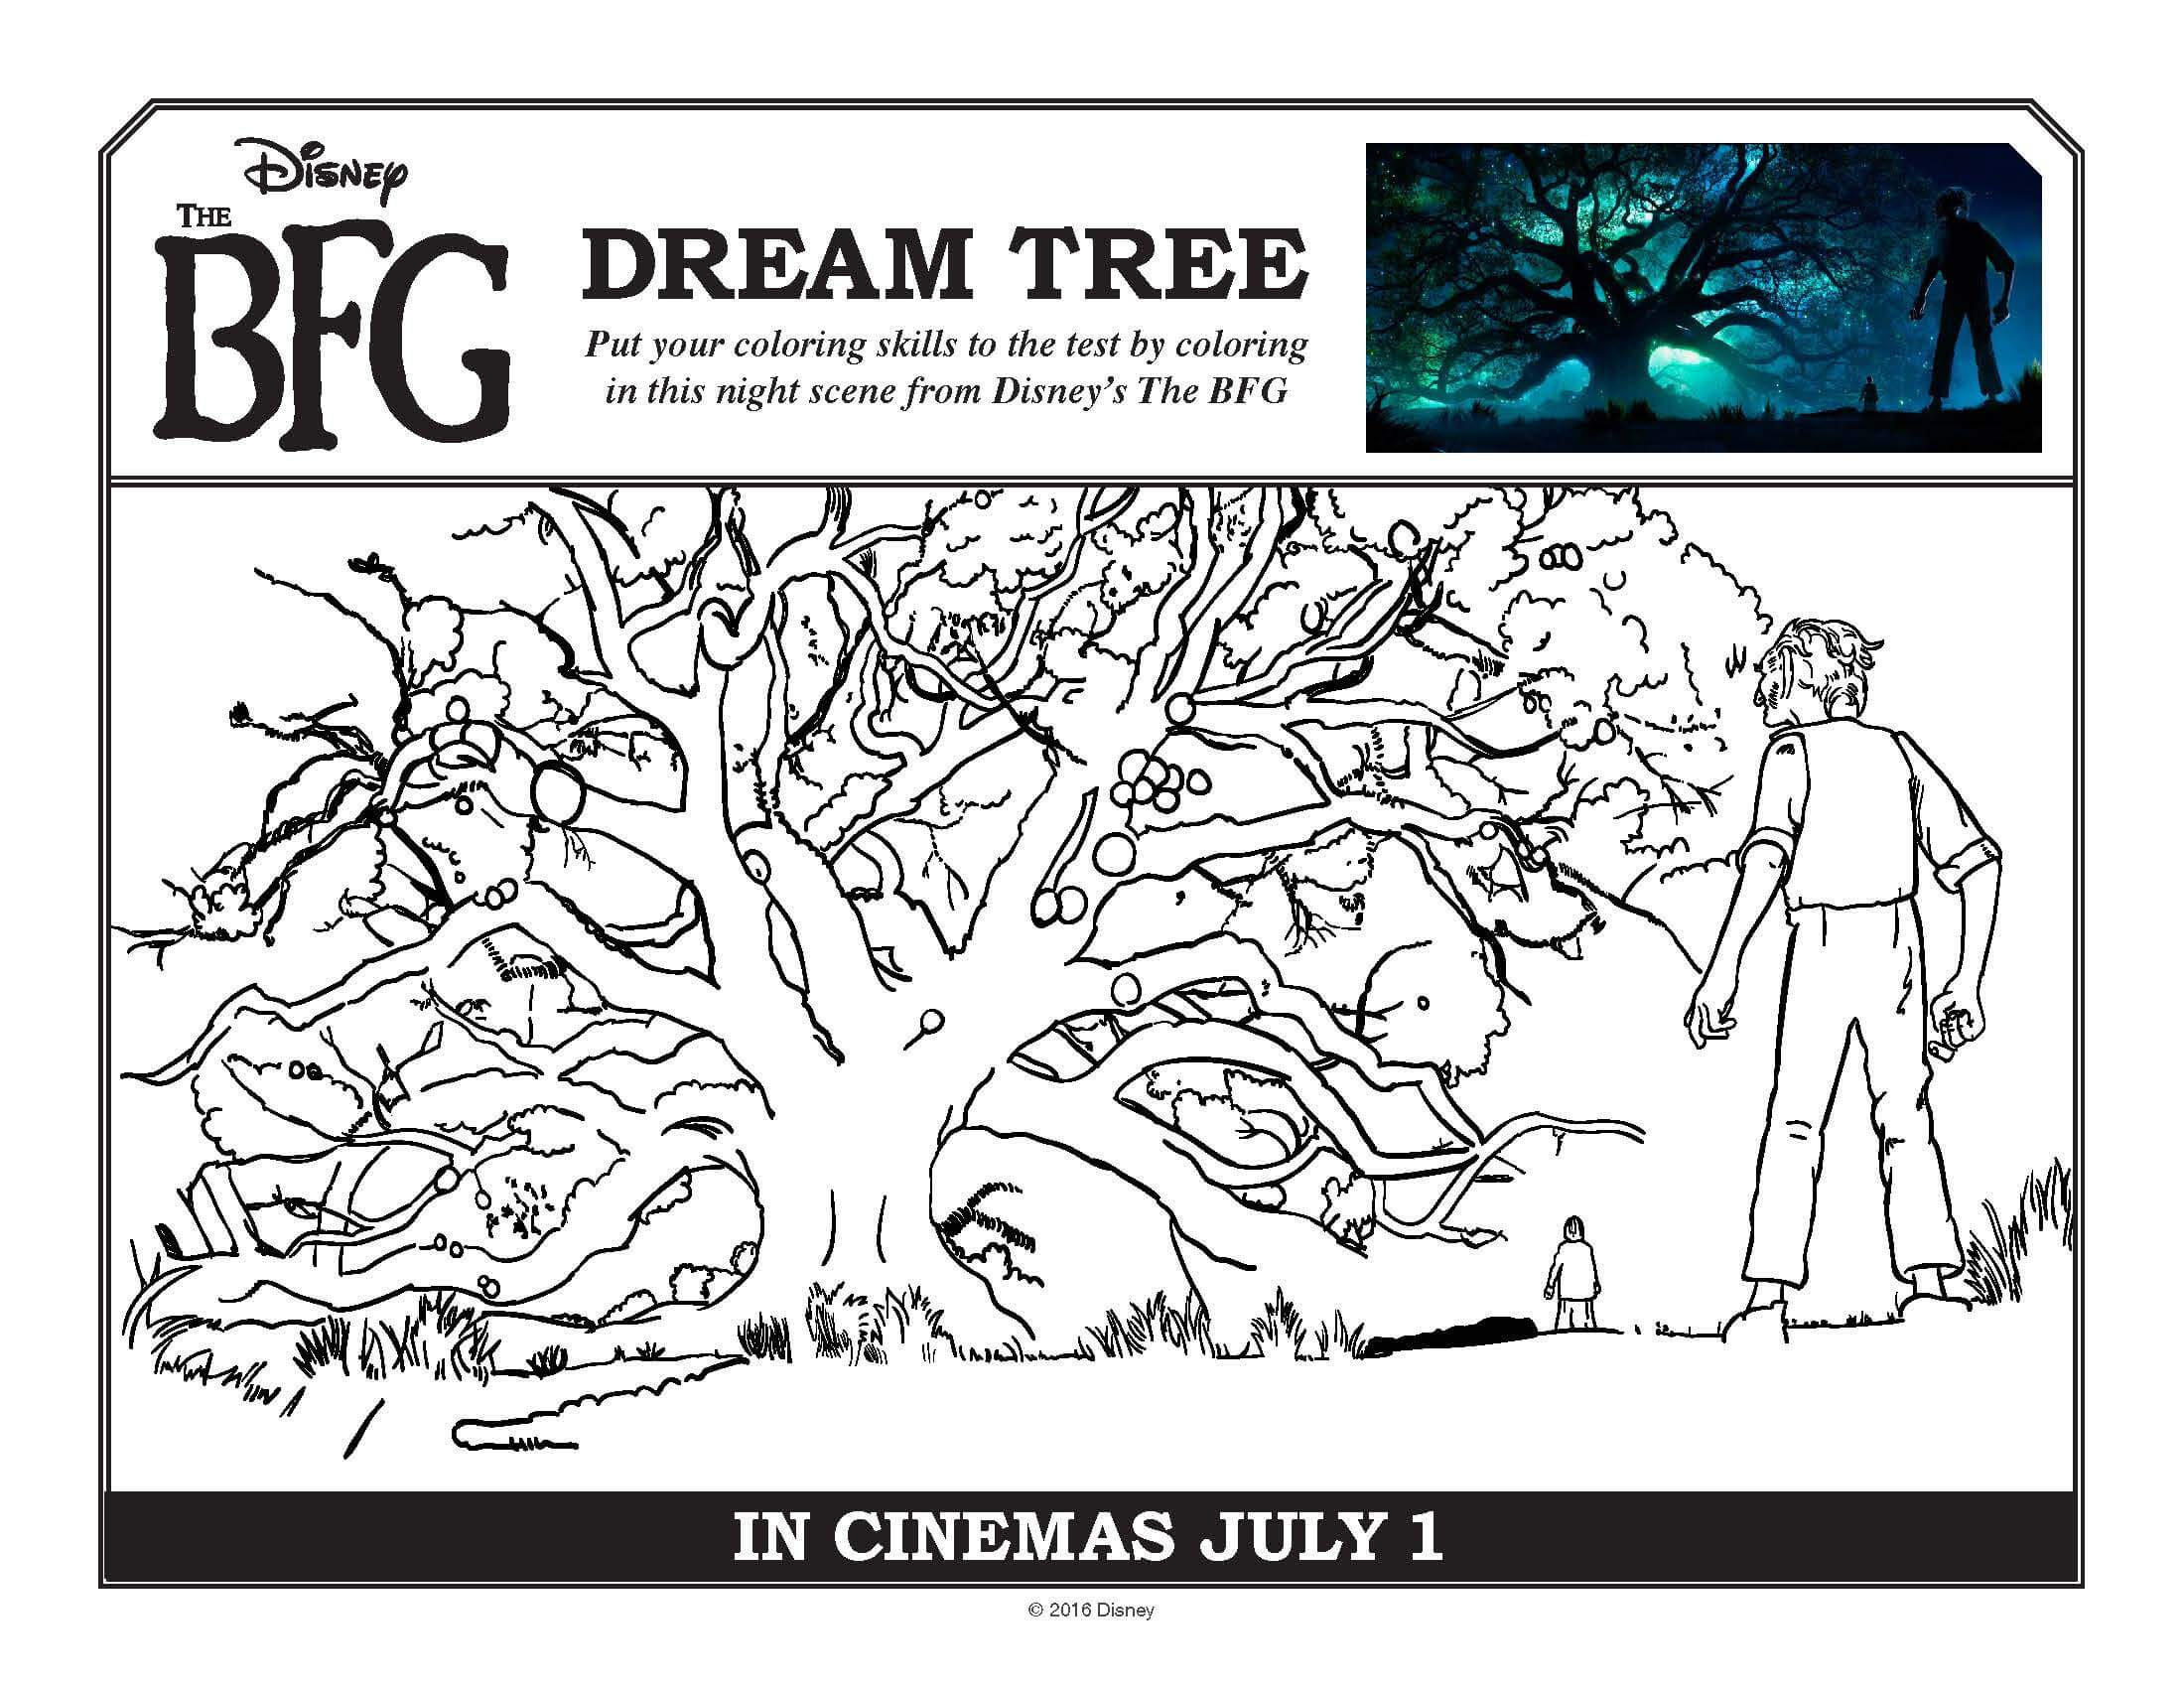 Bfg Coloring Pages
 The BFG Coloring pages and free printables